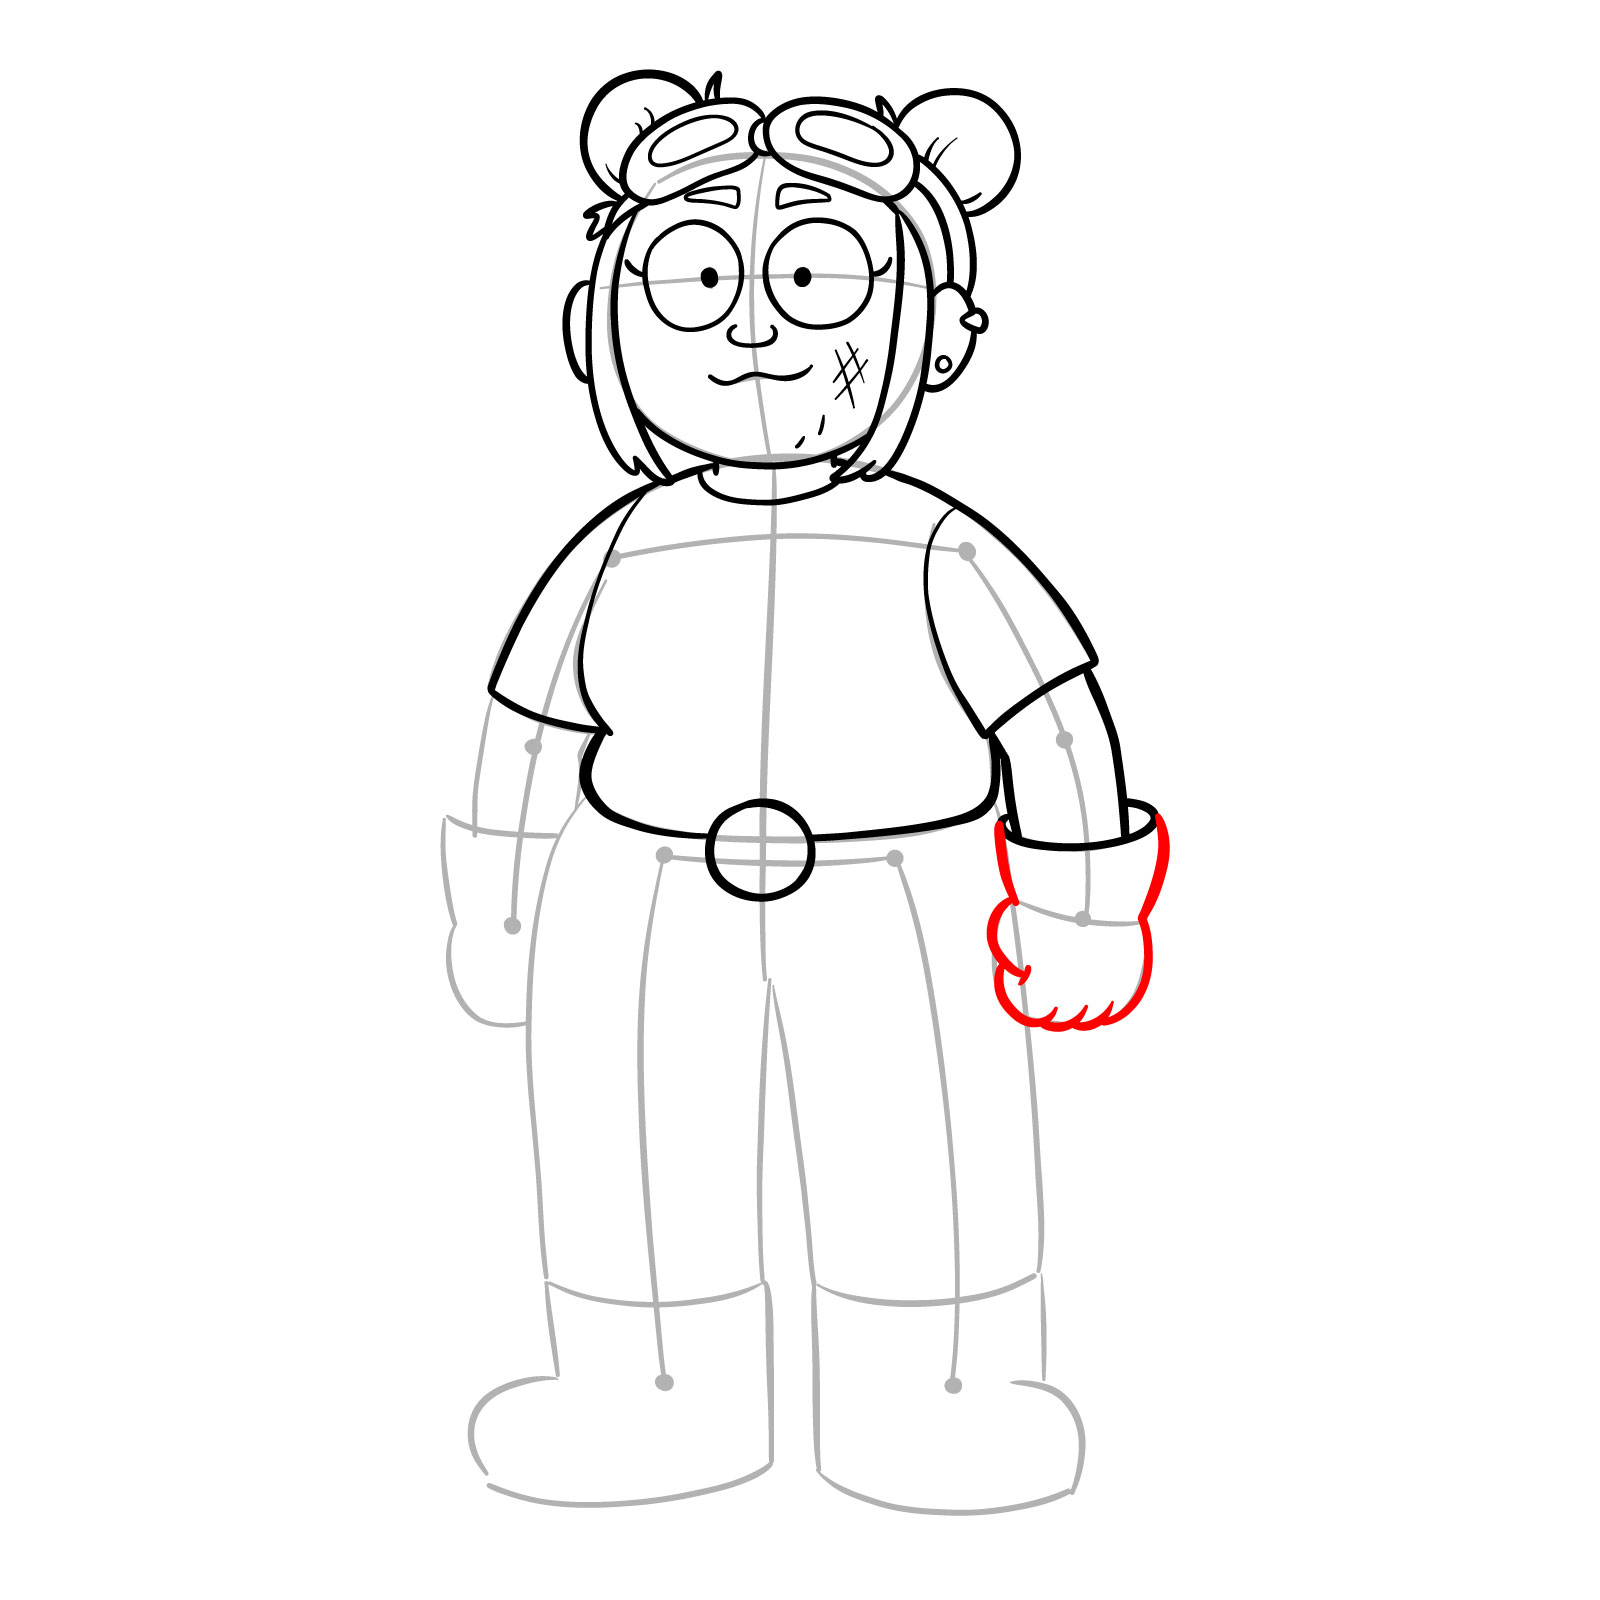 How to draw Jess from Amphibia - step 12